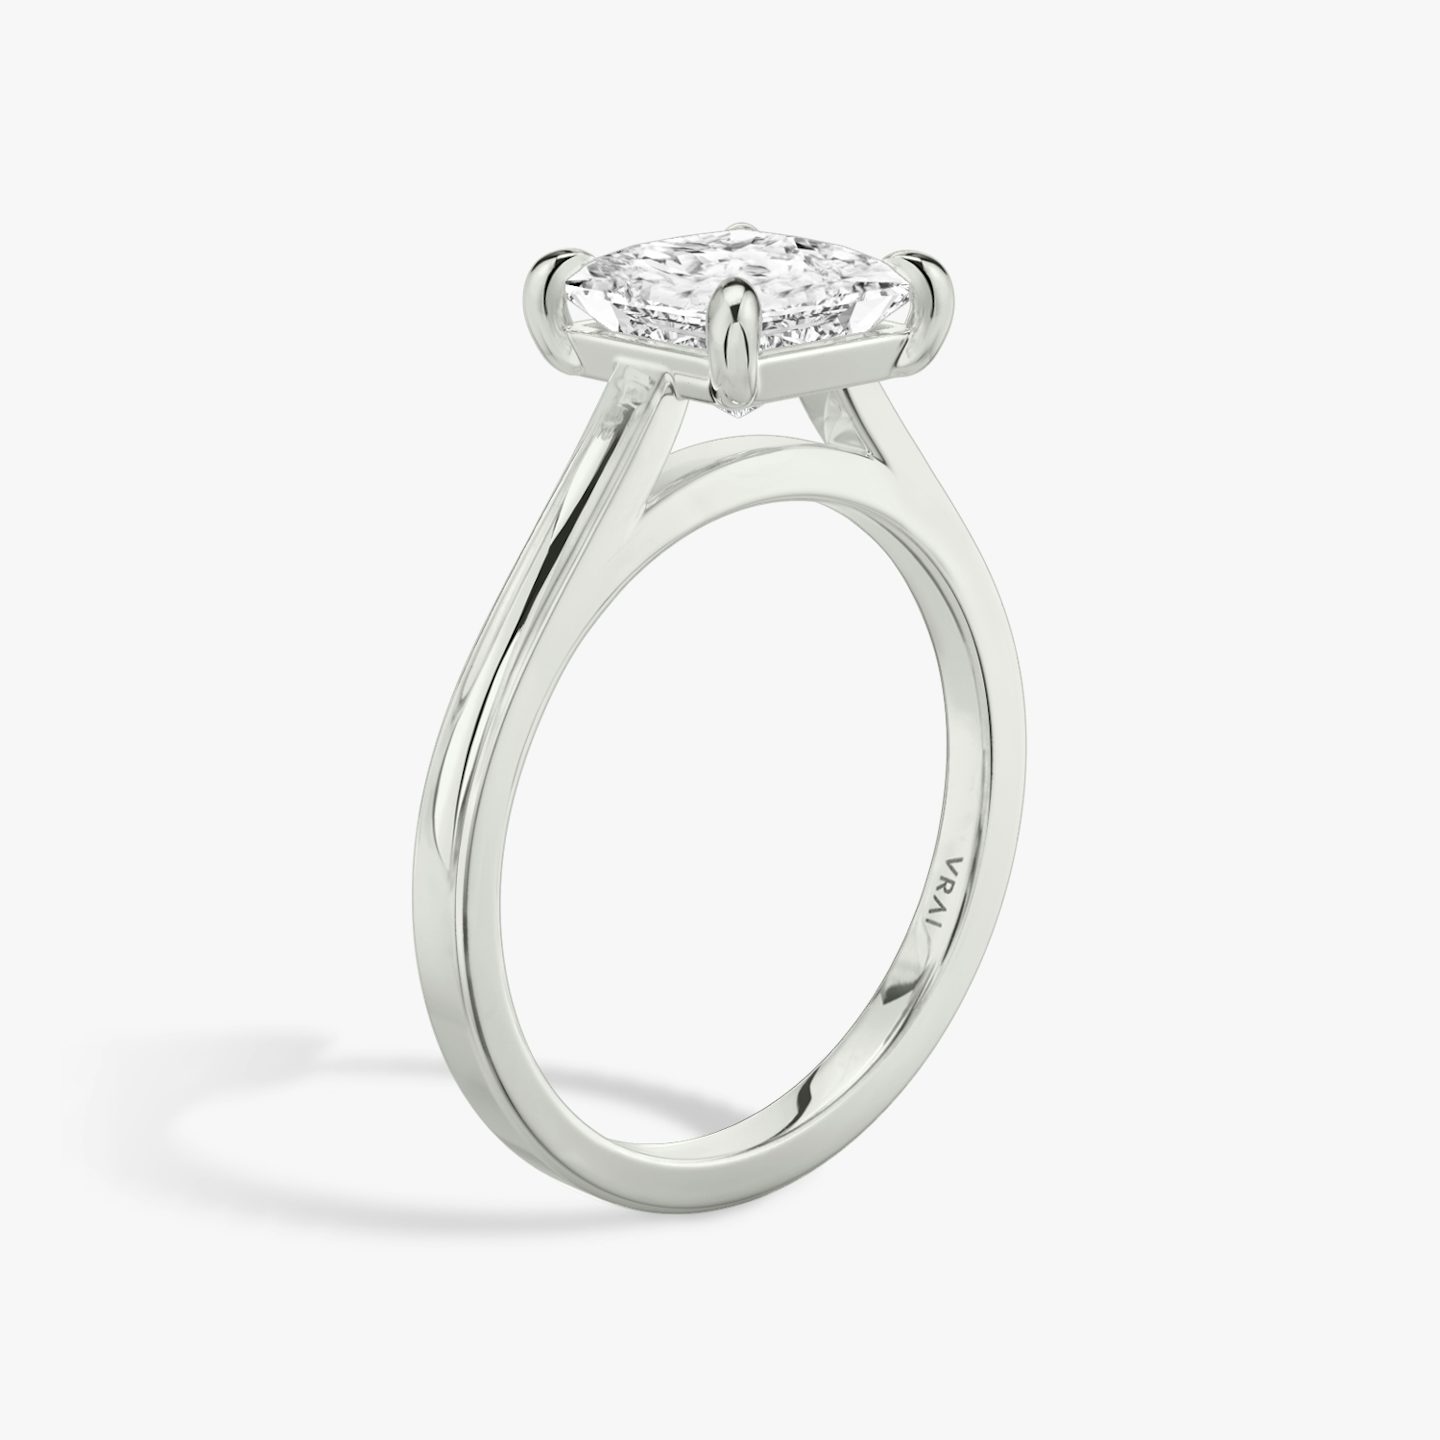 The Cathedral | princess | 18k | white-gold | bandAccent: plain | diamondOrientation: vertical | caratWeight: other